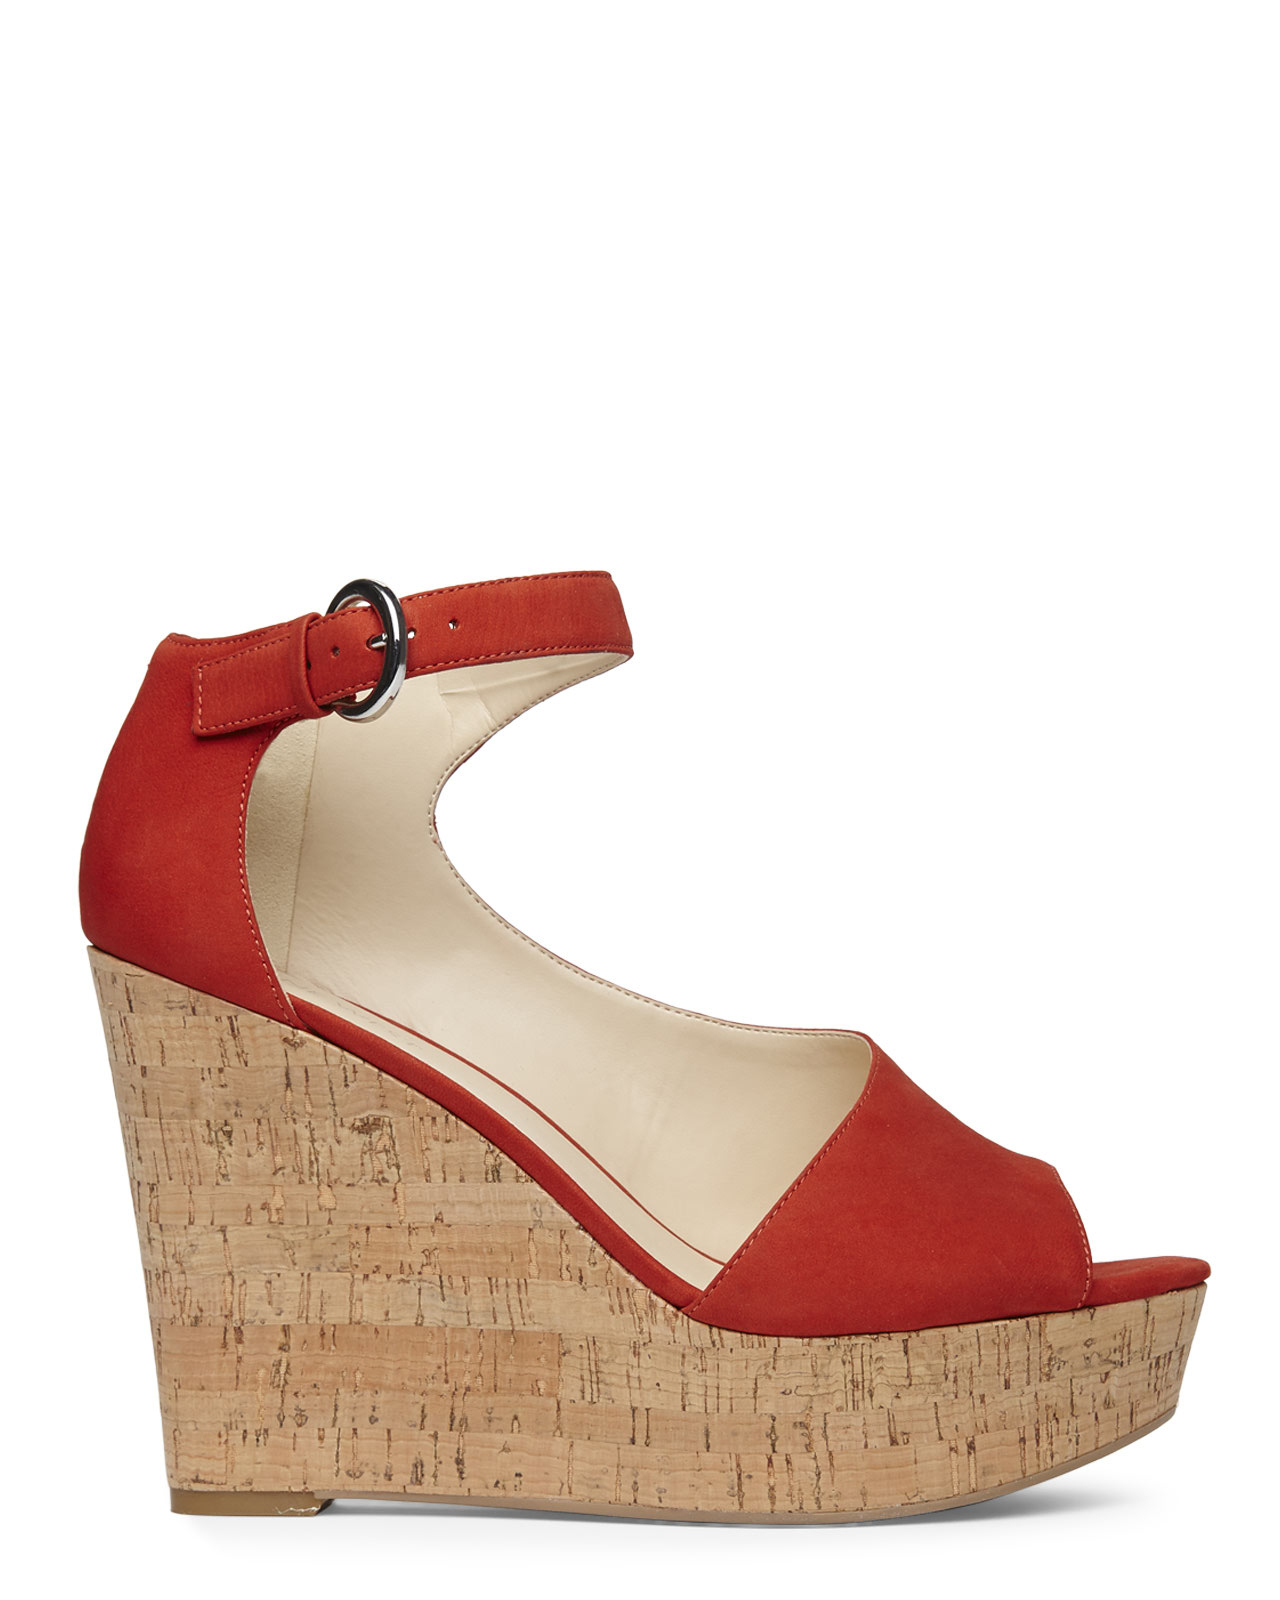 Nine west Red Adyssinian Wedge Sandal in Red